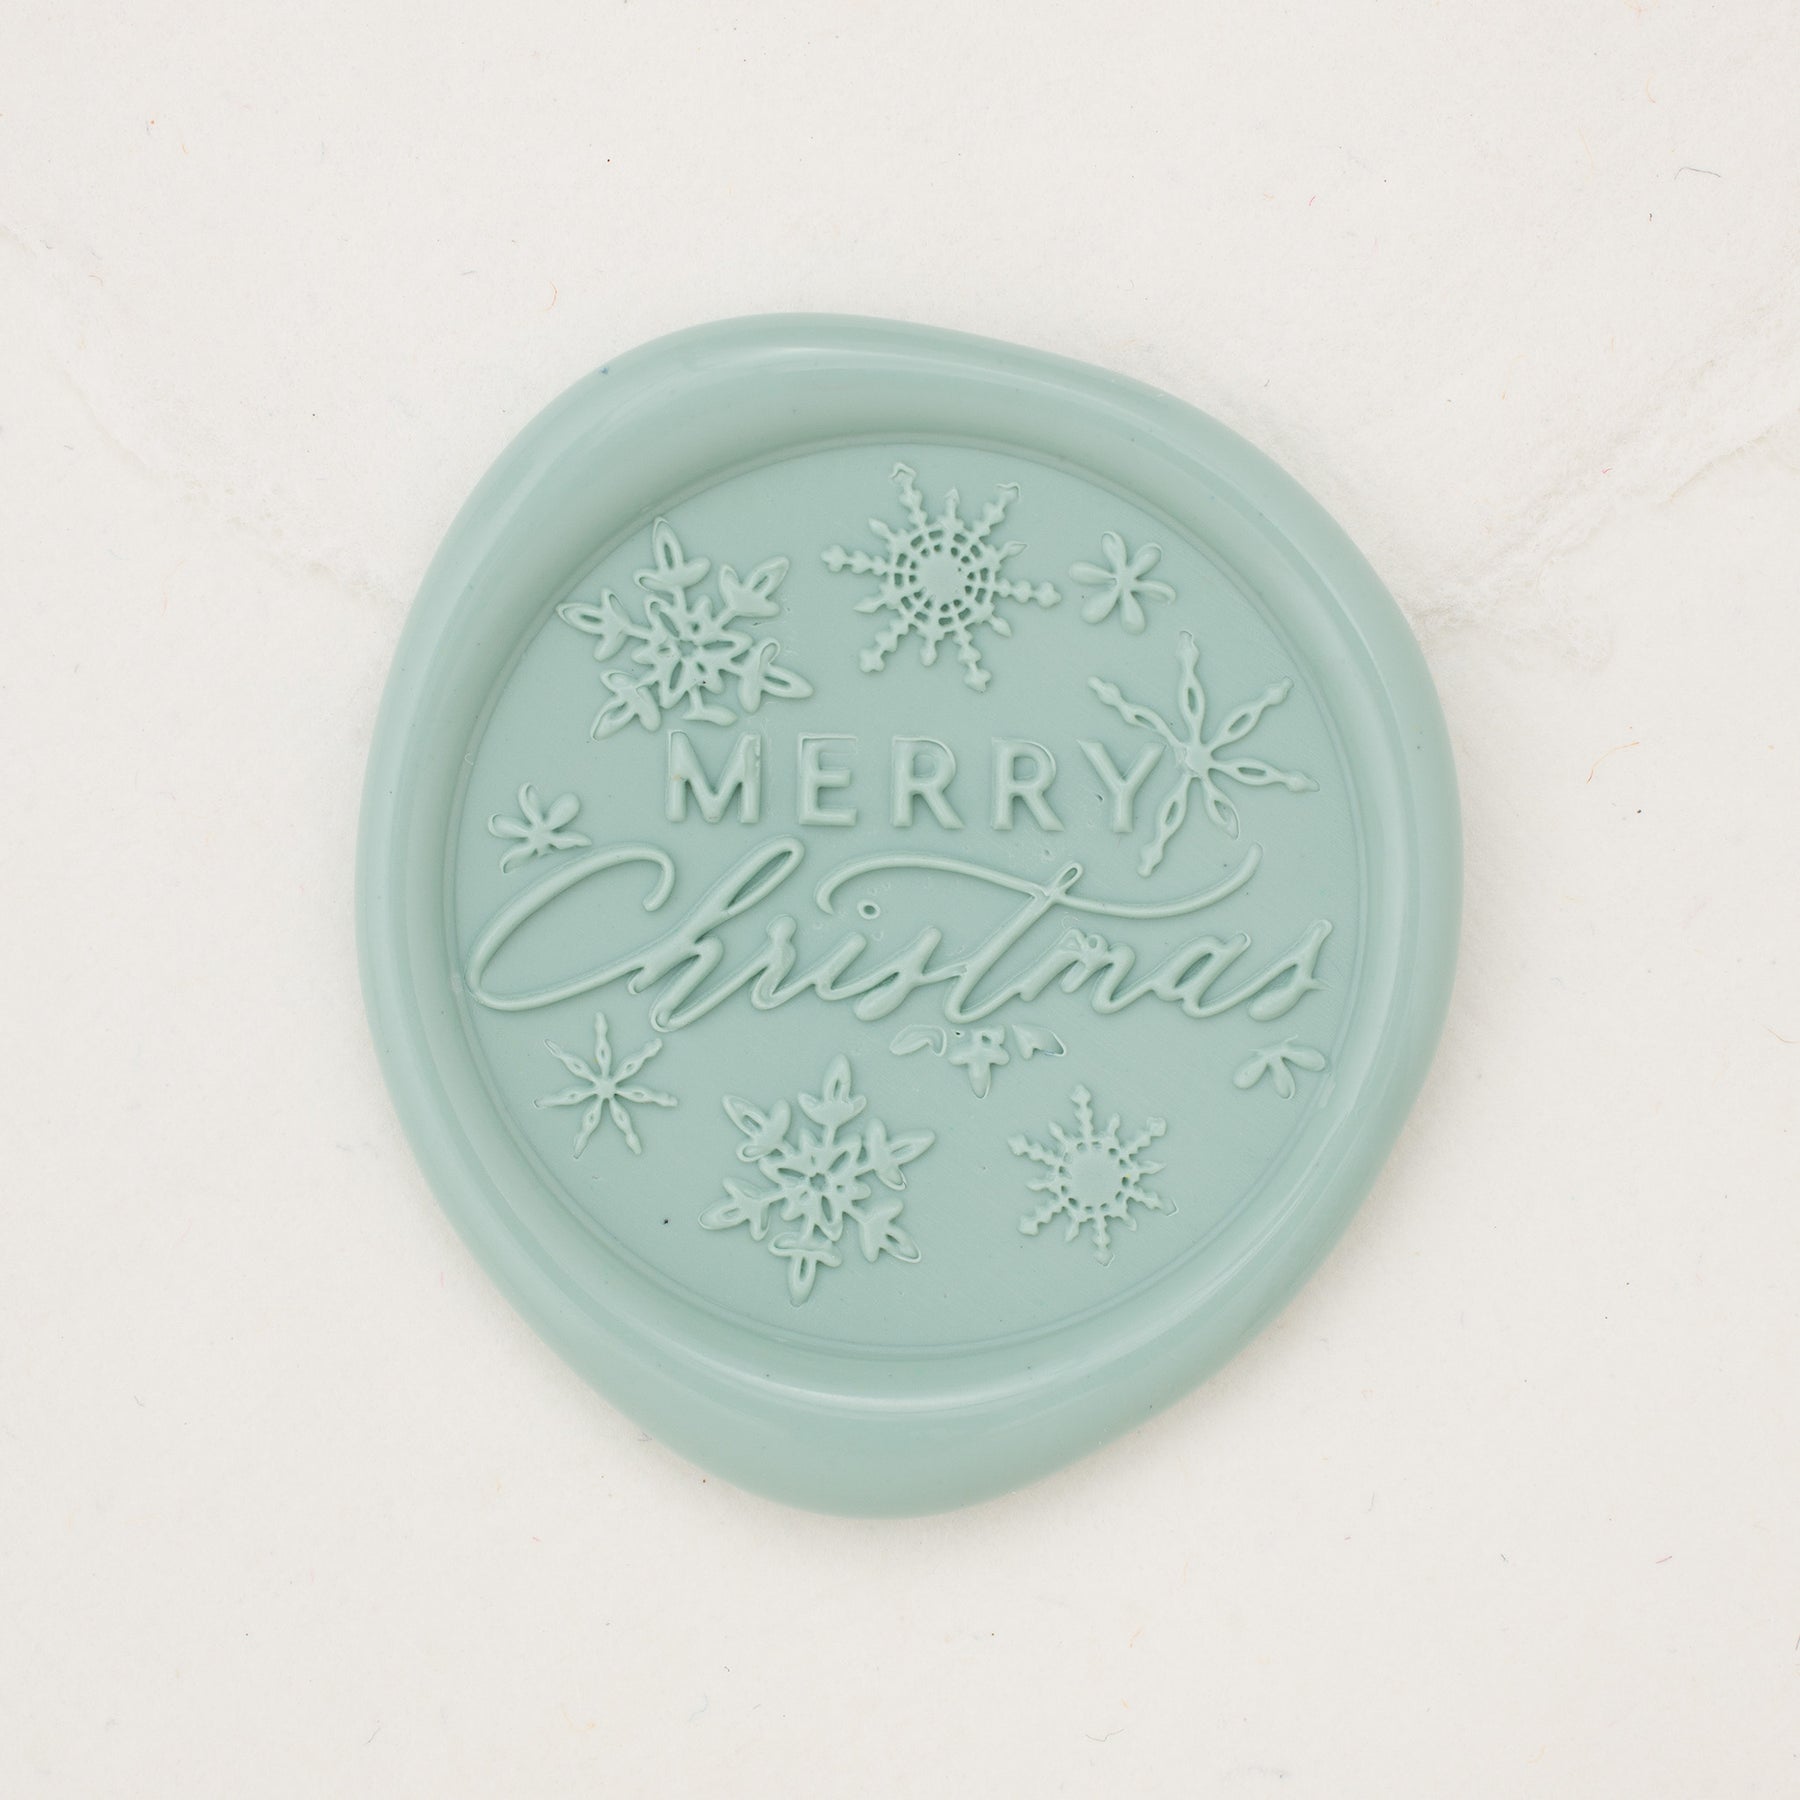 Merry Christmas Oval Wax Seal Stamp from the Sealed for Christmas Collection